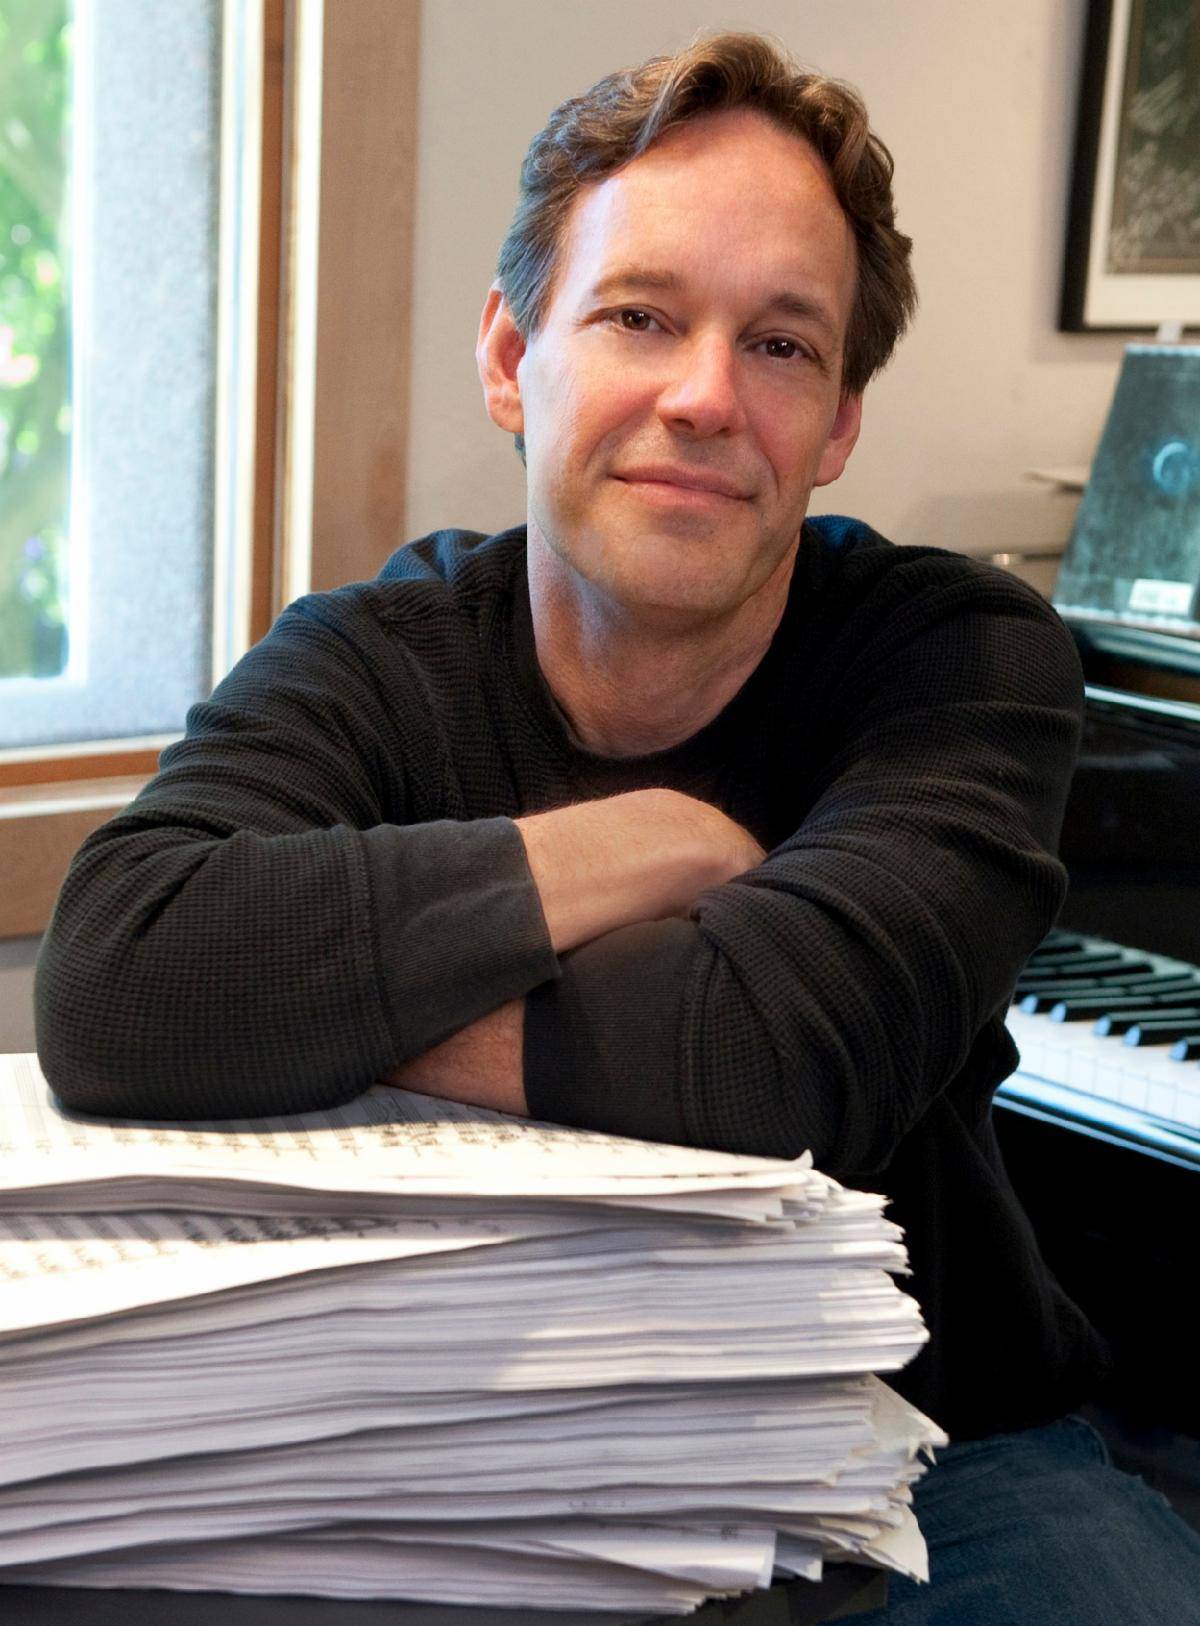 Contributed photo | Composer Jake Heggie